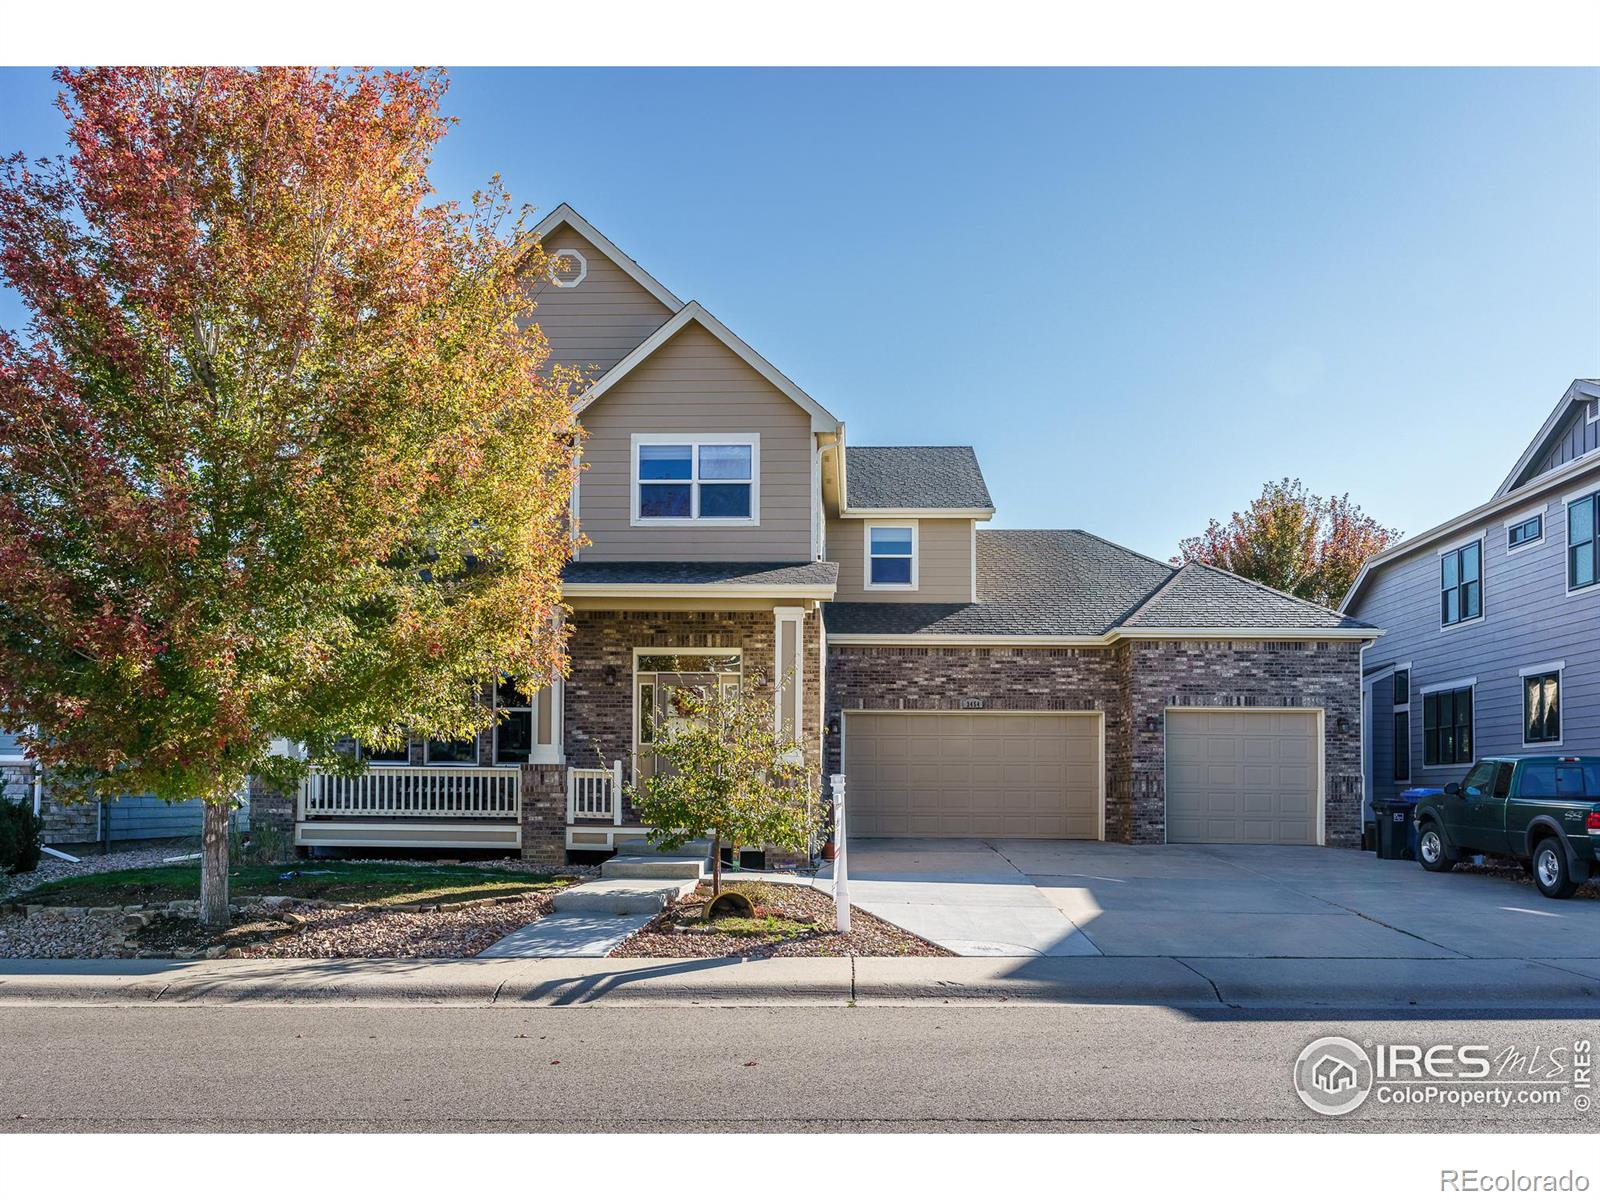 3454  new castle drive, loveland sold home. Closed on 2024-02-08 for $775,000.